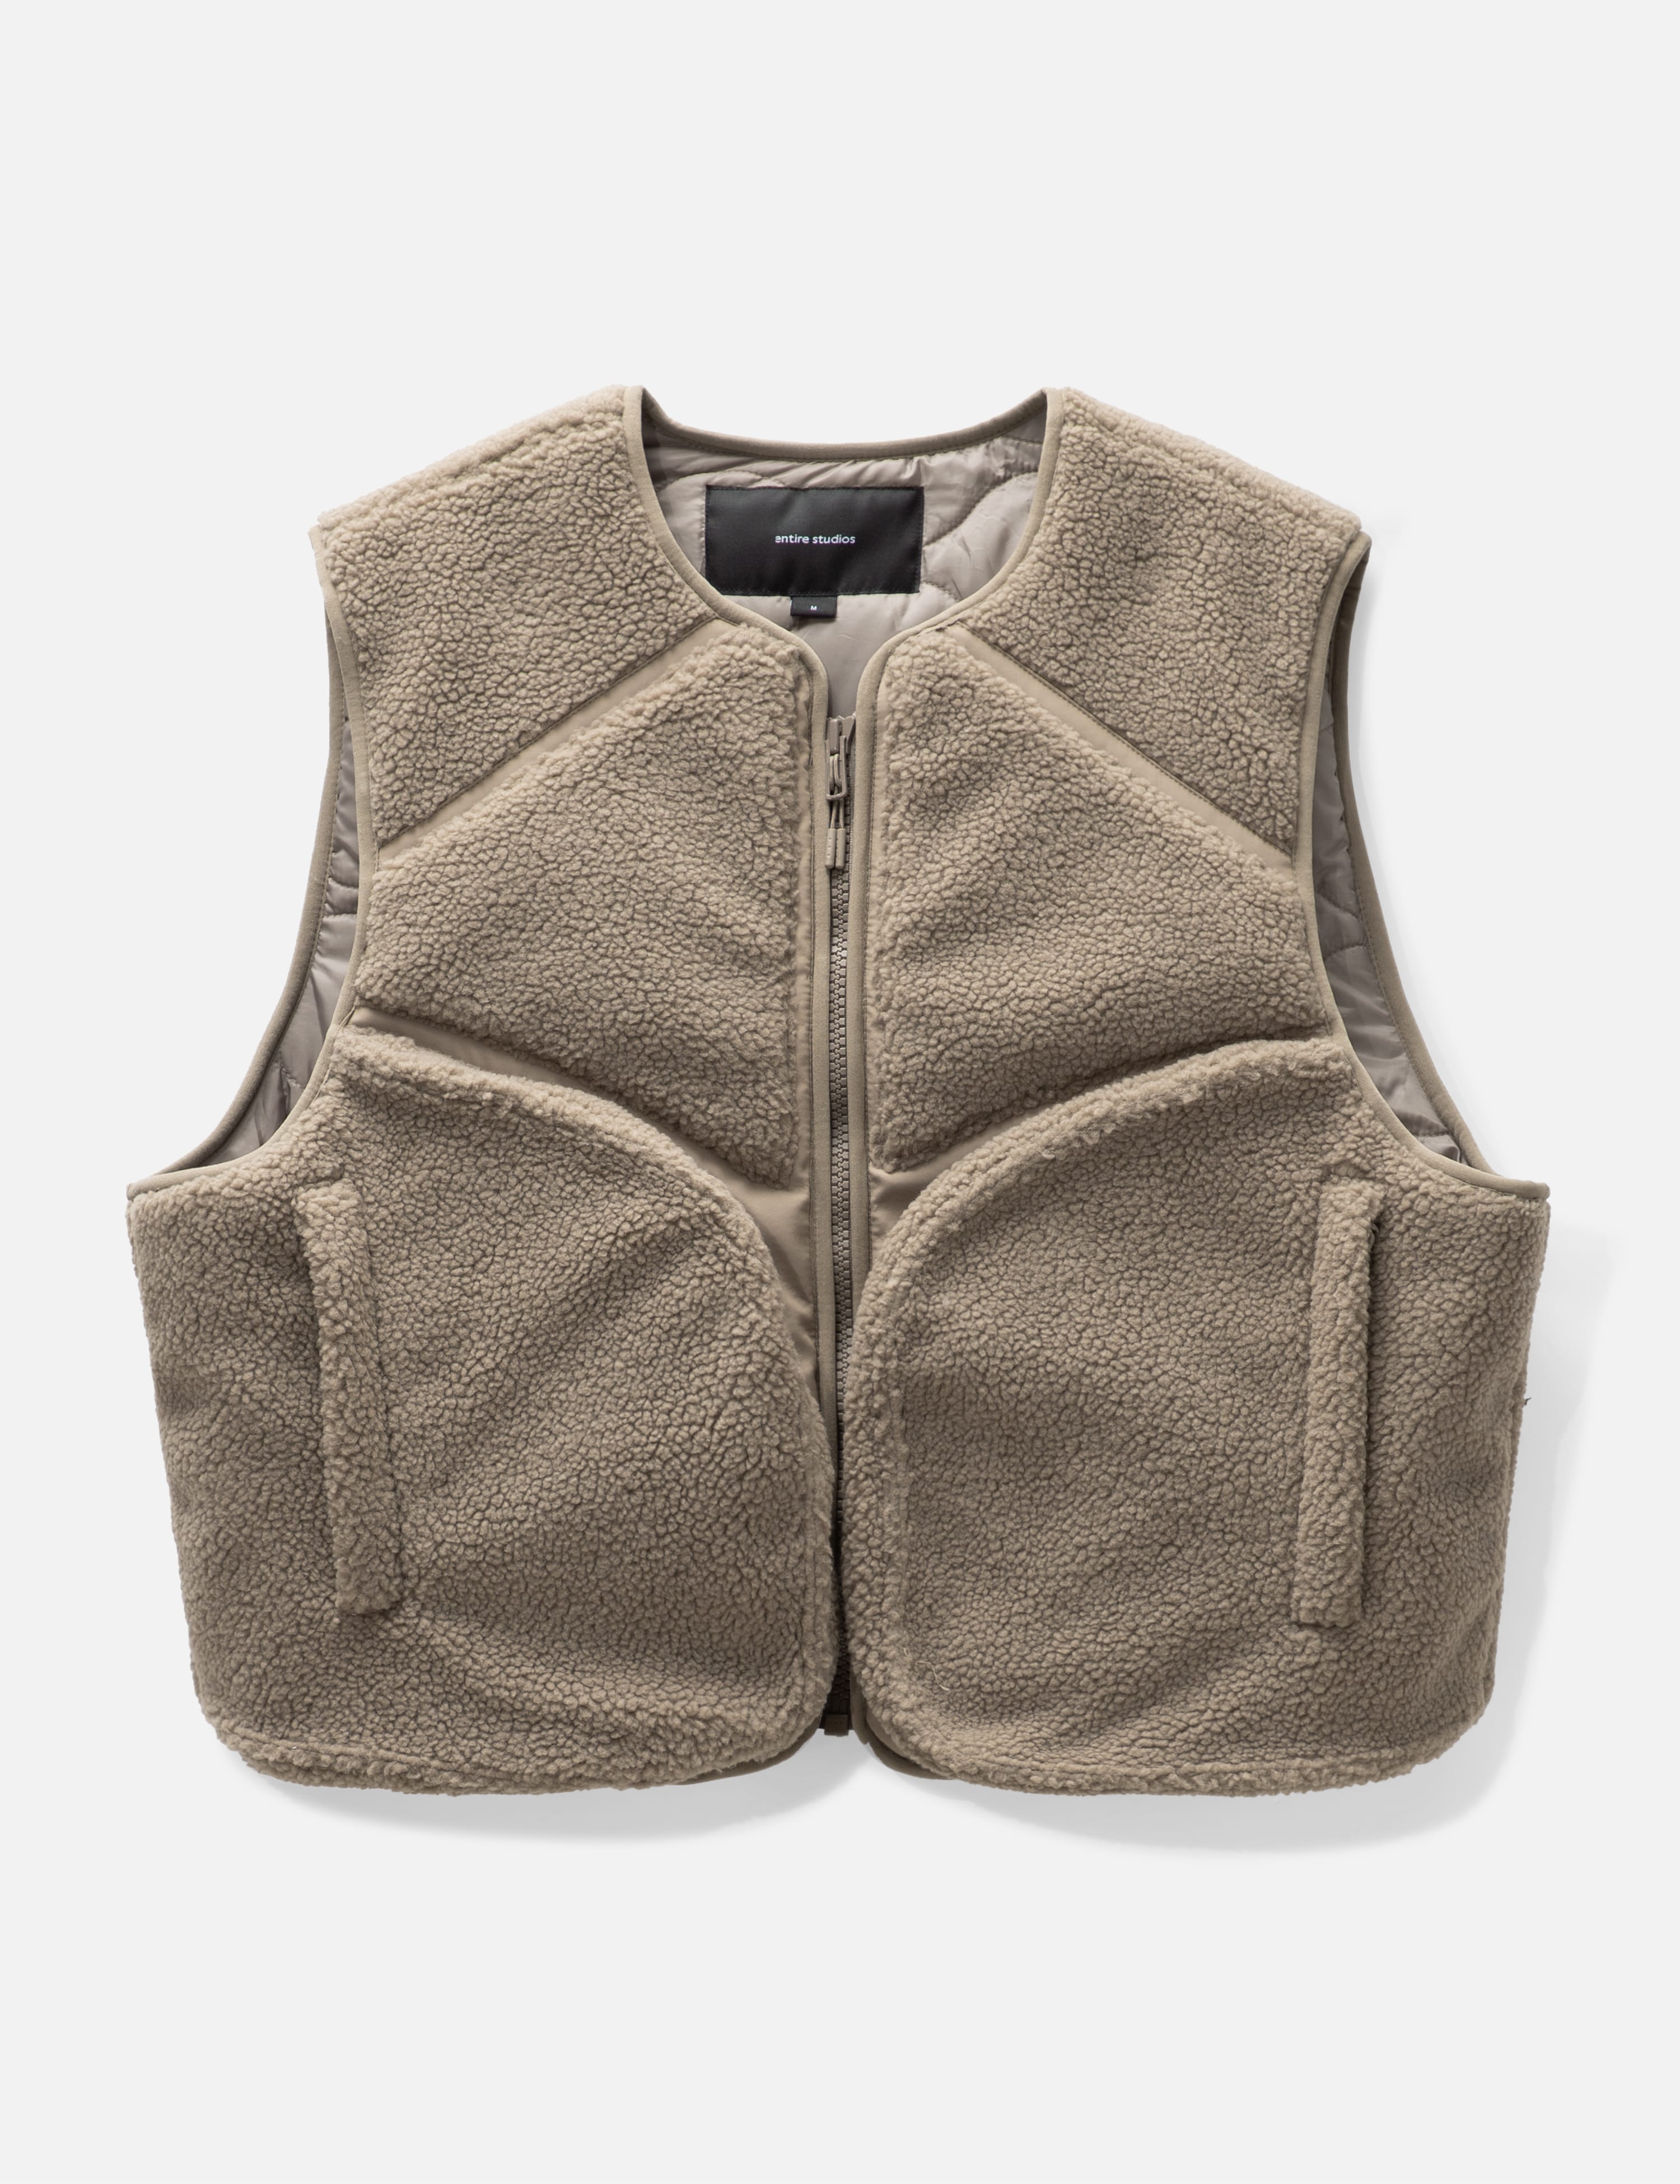 WILD THINGS - MONSTER VEST | HBX - Globally Curated Fashion and 